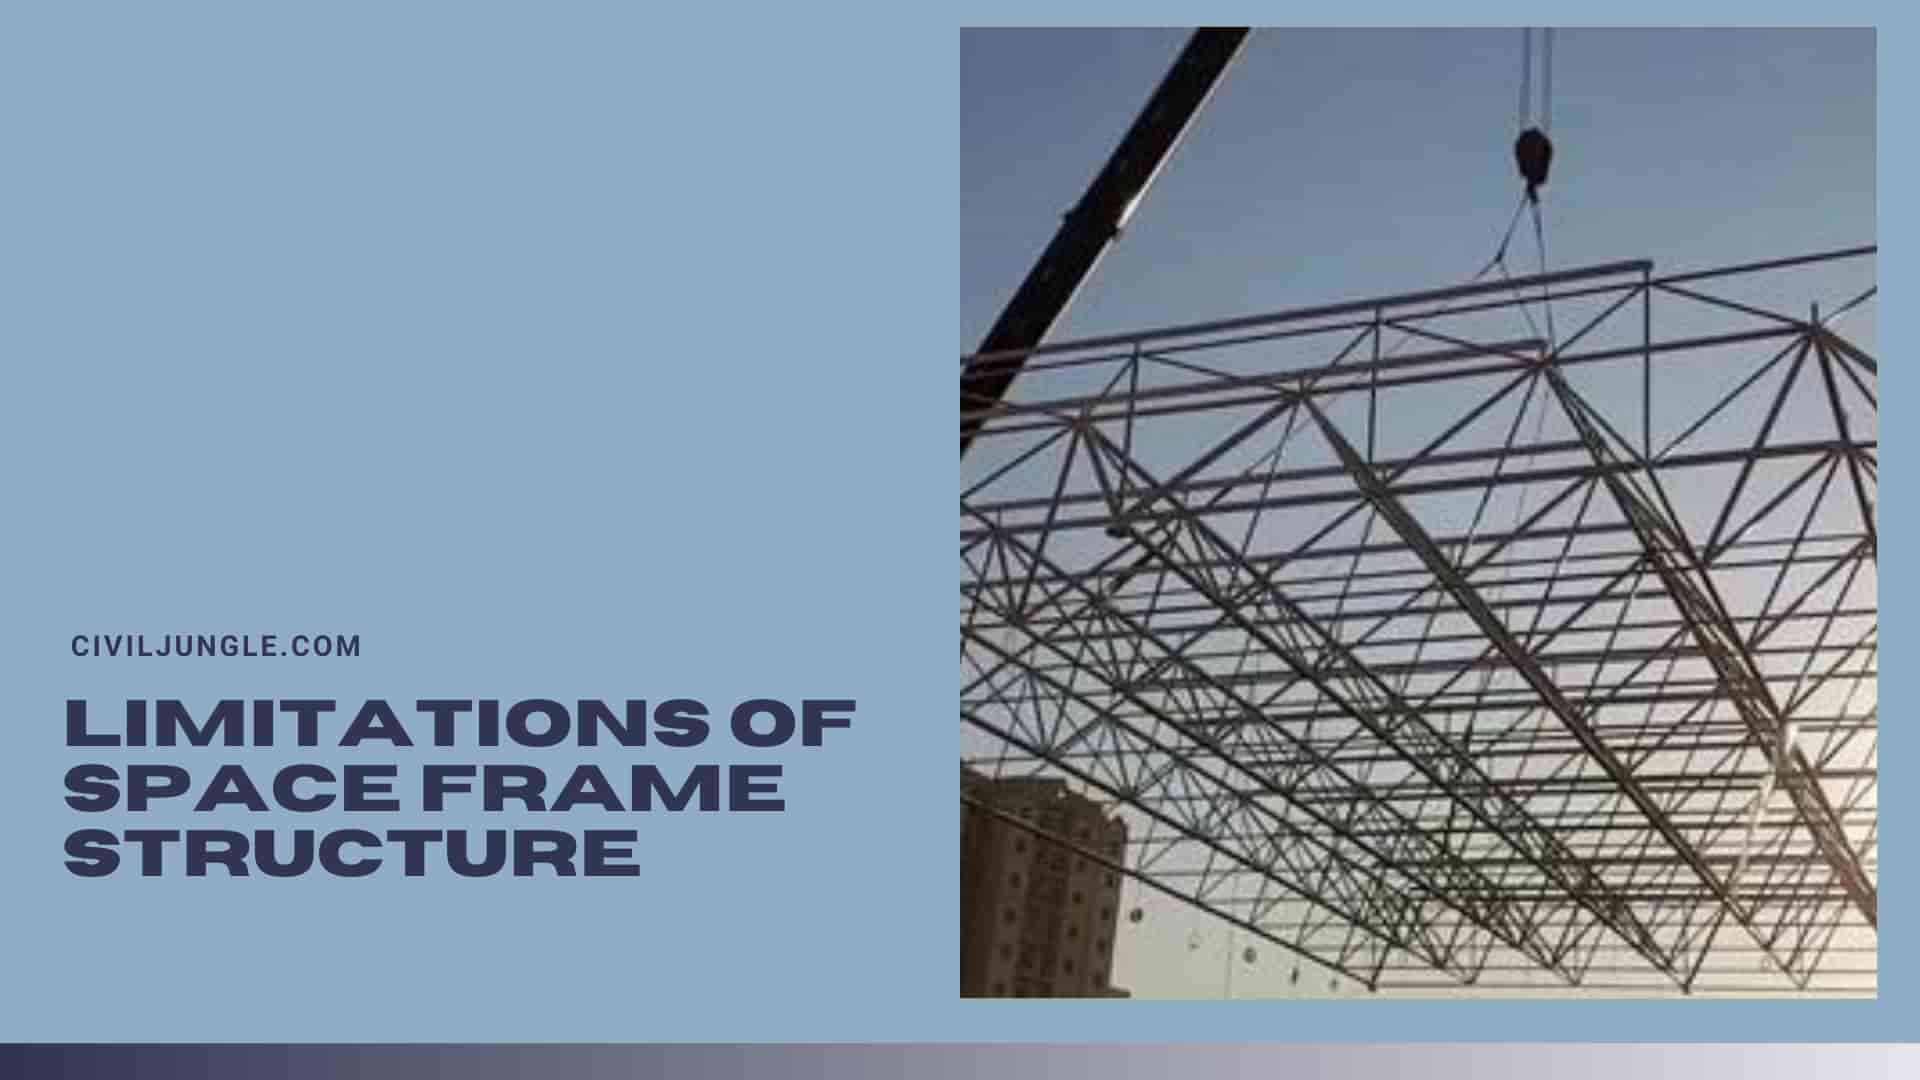 Limitations of Space Frame Structure